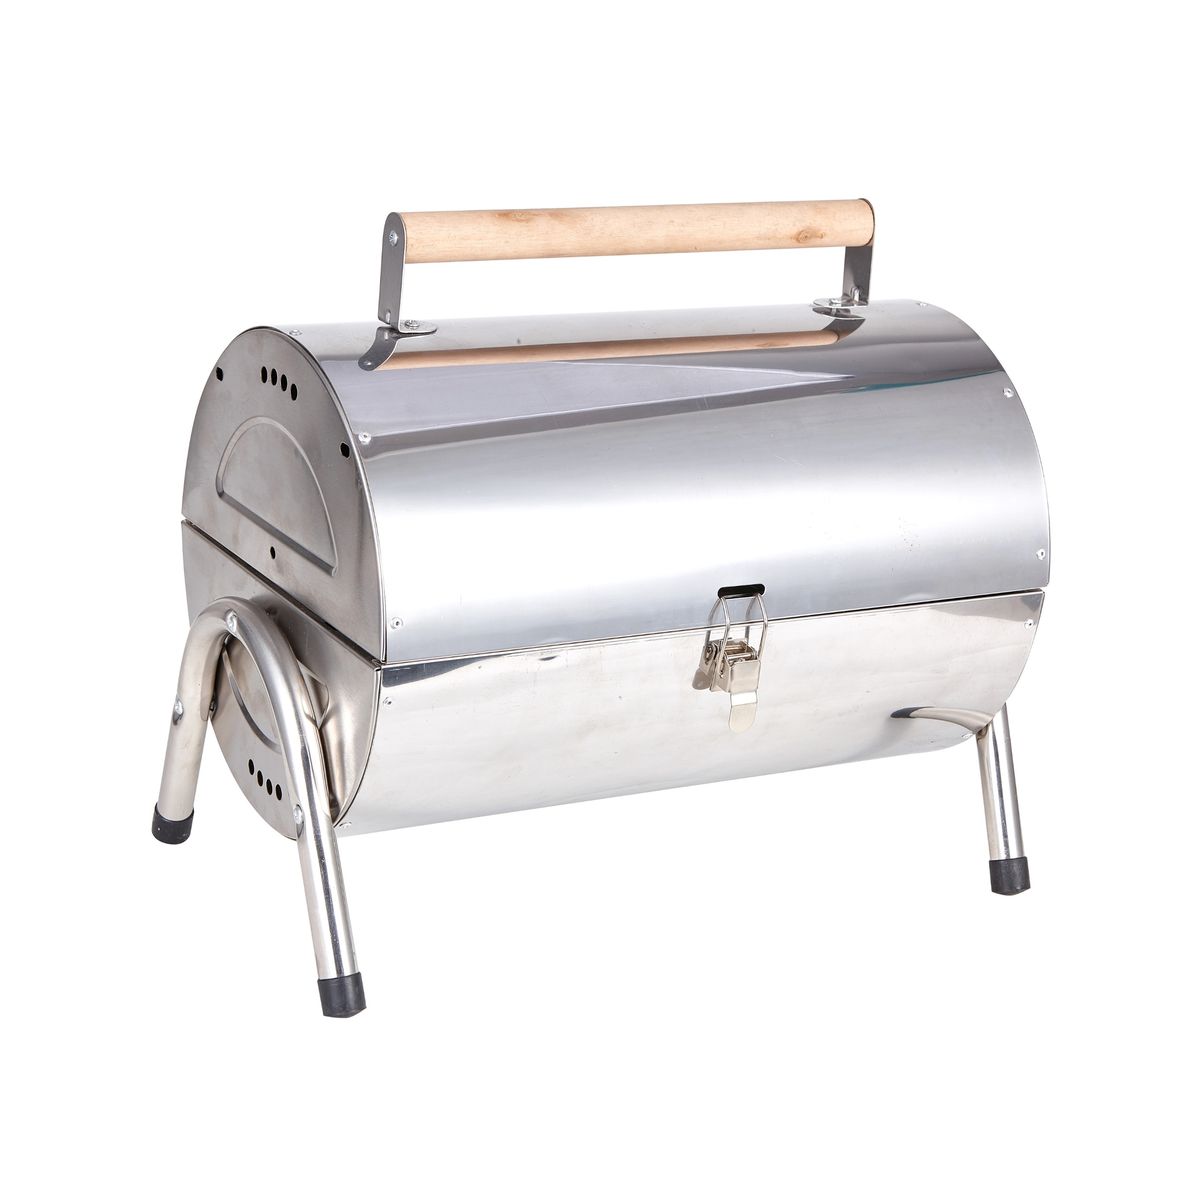 Outdoor Buddy - Stainless Steel Tabletop Grill & Smoker